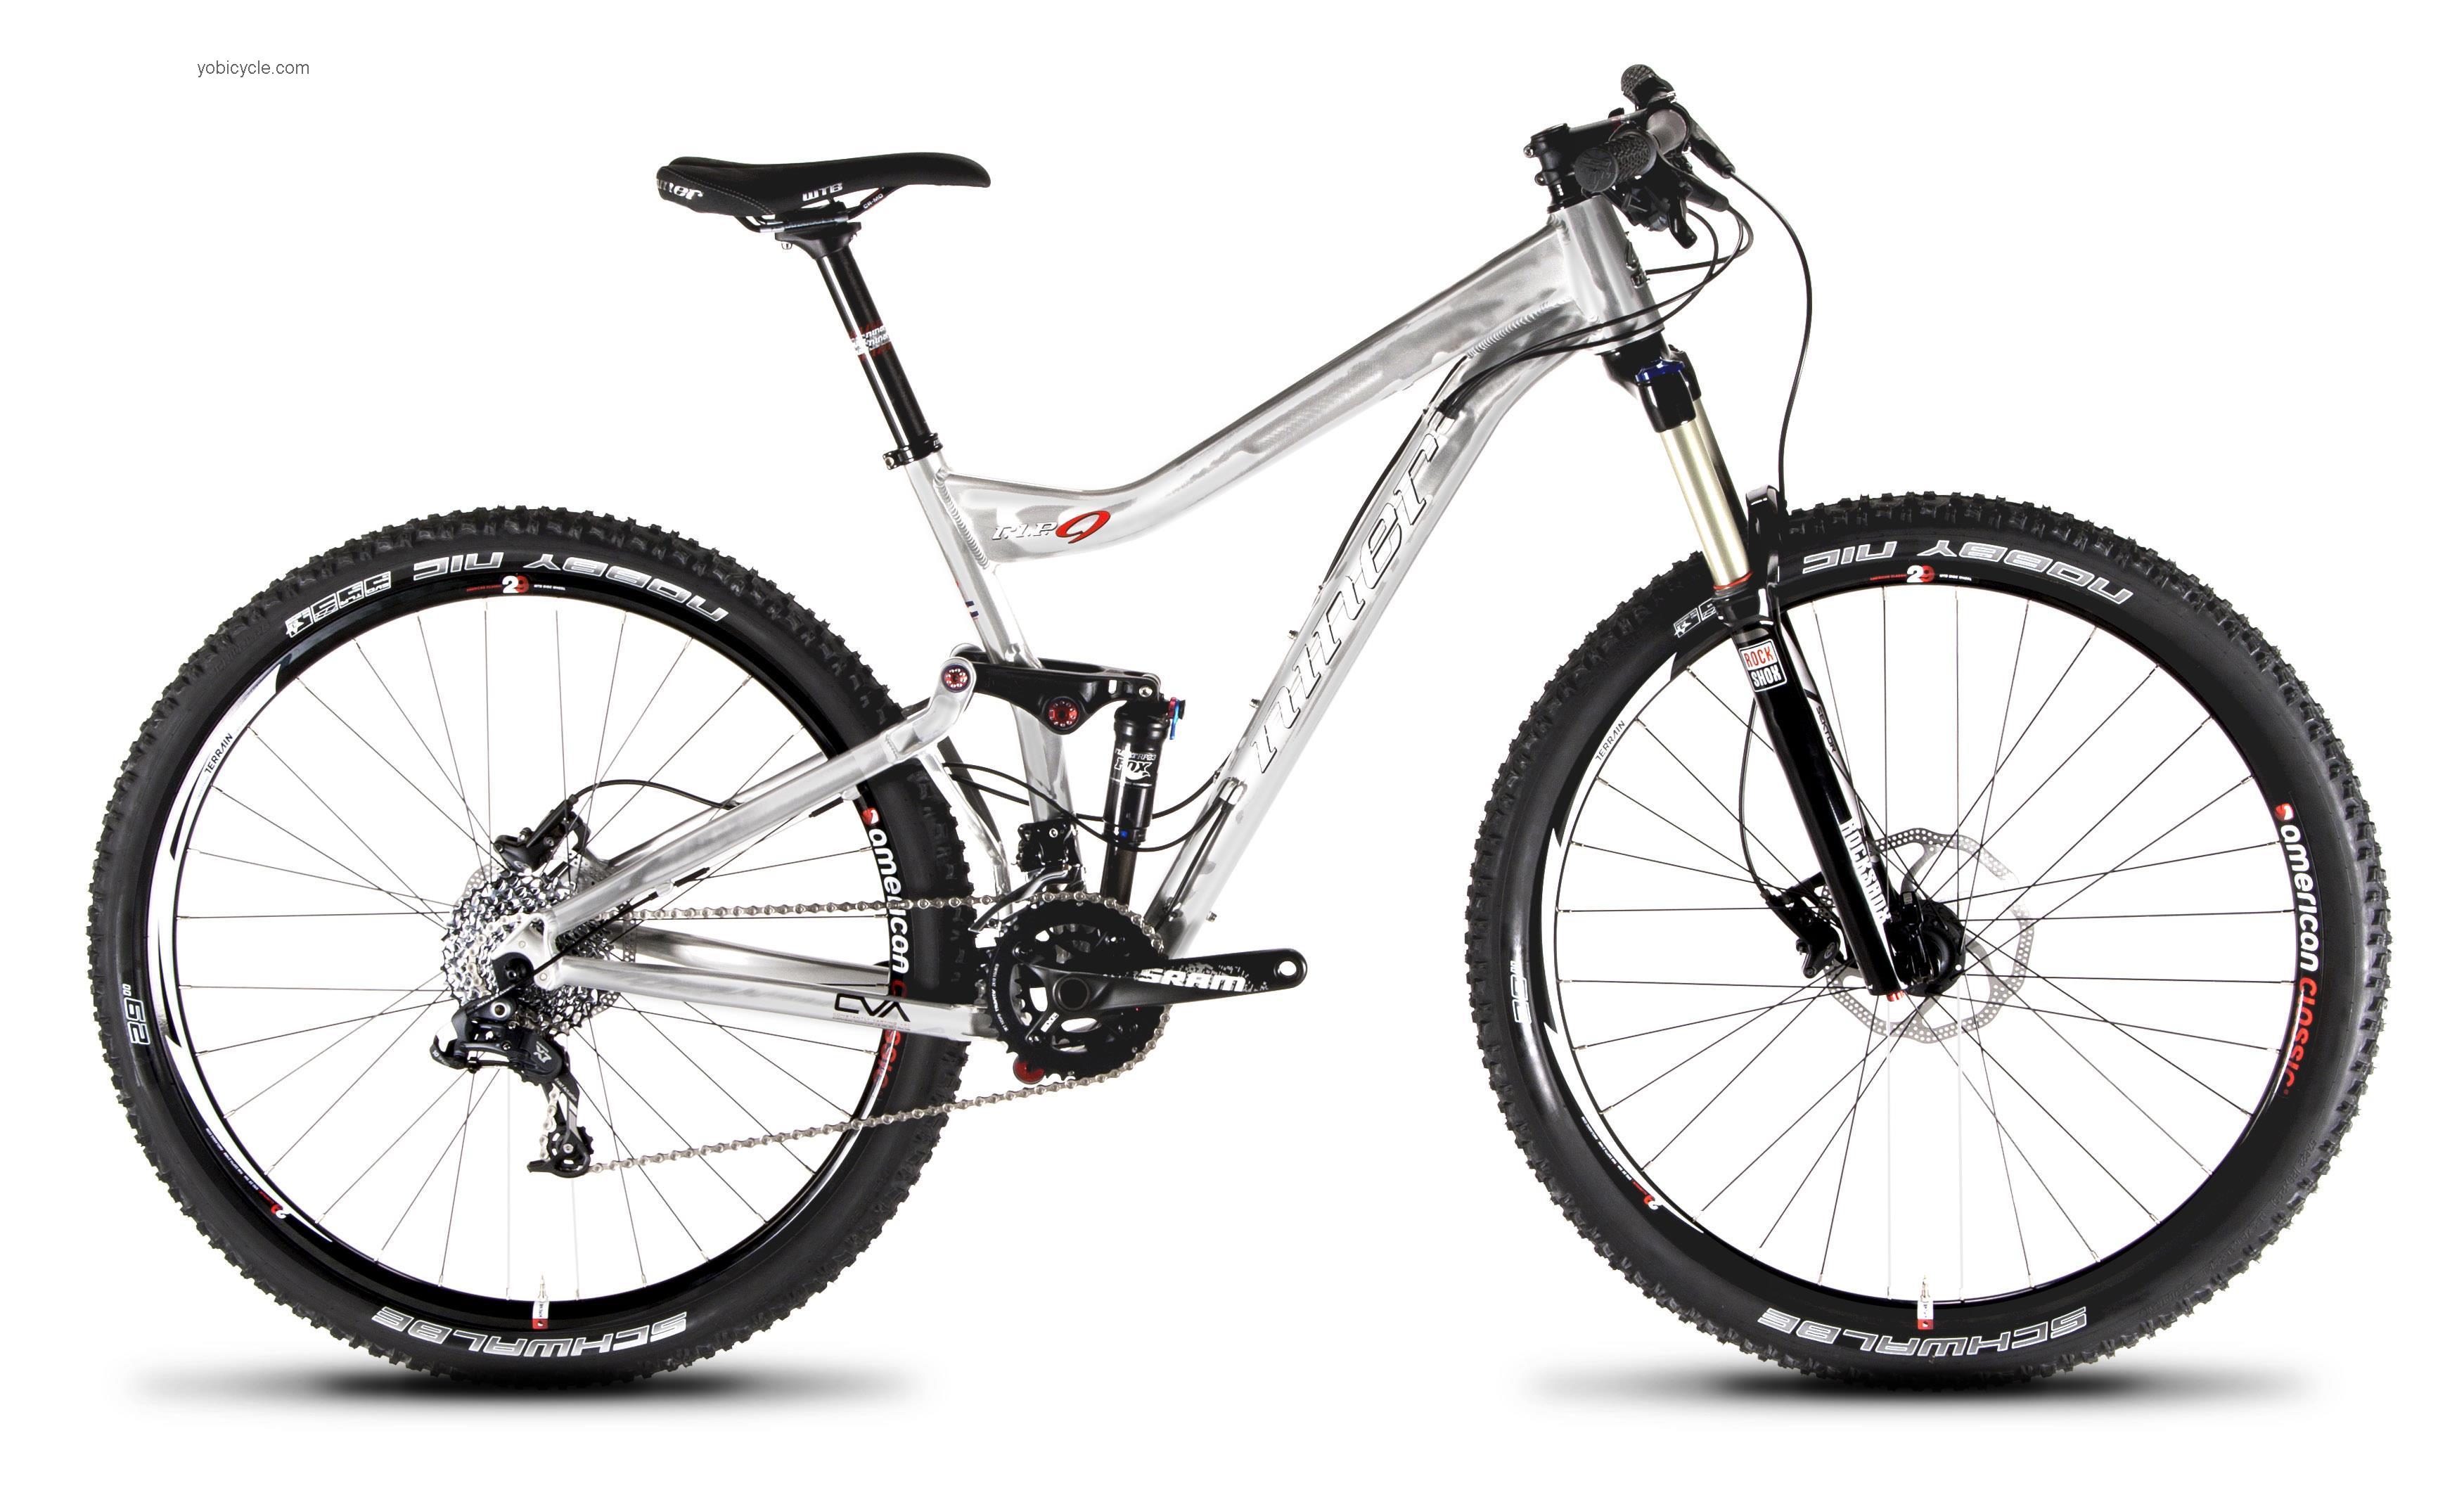 Niner R.I.P 9 X7 2013 comparison online with competitors